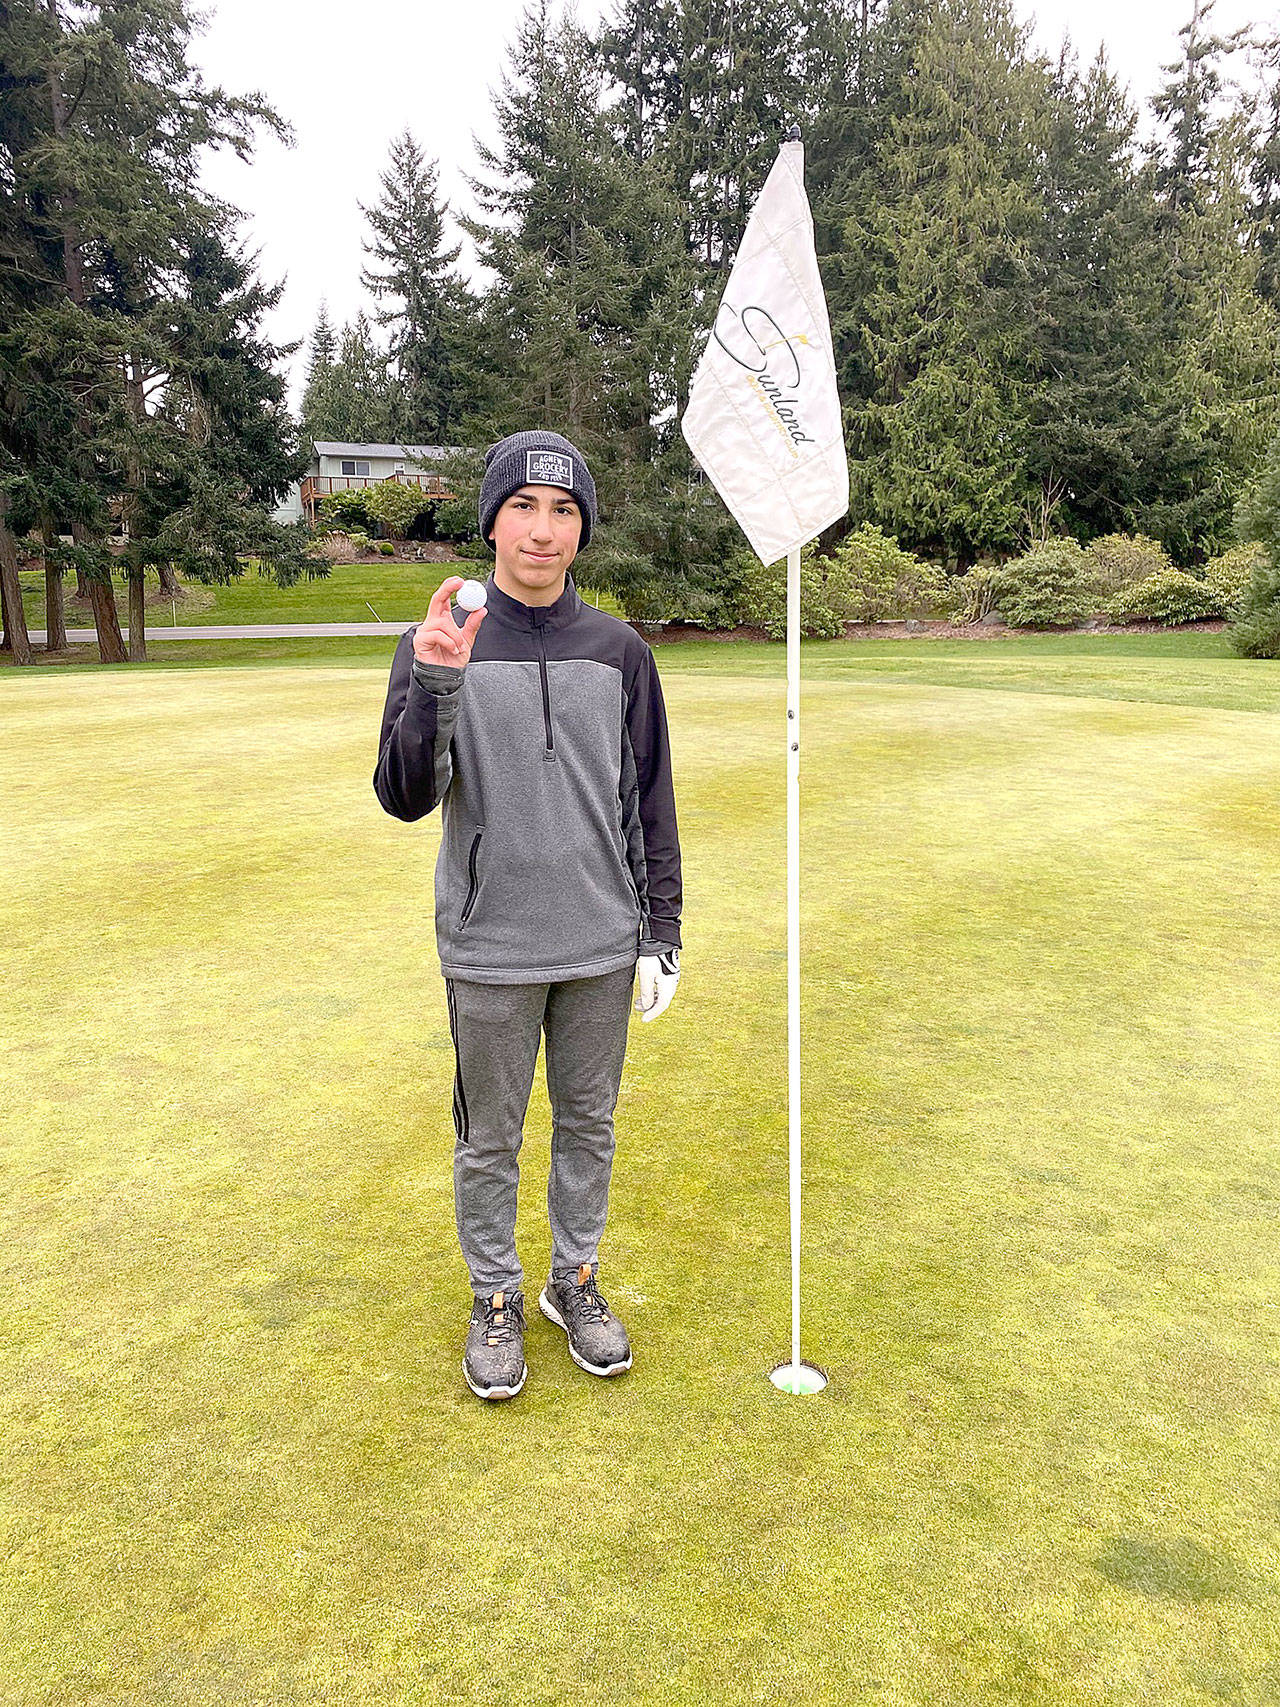 (Sunland Golf and Country Club)
Port Angeles junior golfer Phoenix Flores, 13, made a hole-in-one at the second hole of the Sunland Golf and Country Club on march 21. Flores hit his shot from 145 yards out with a 9 iron and a Callaway ball.